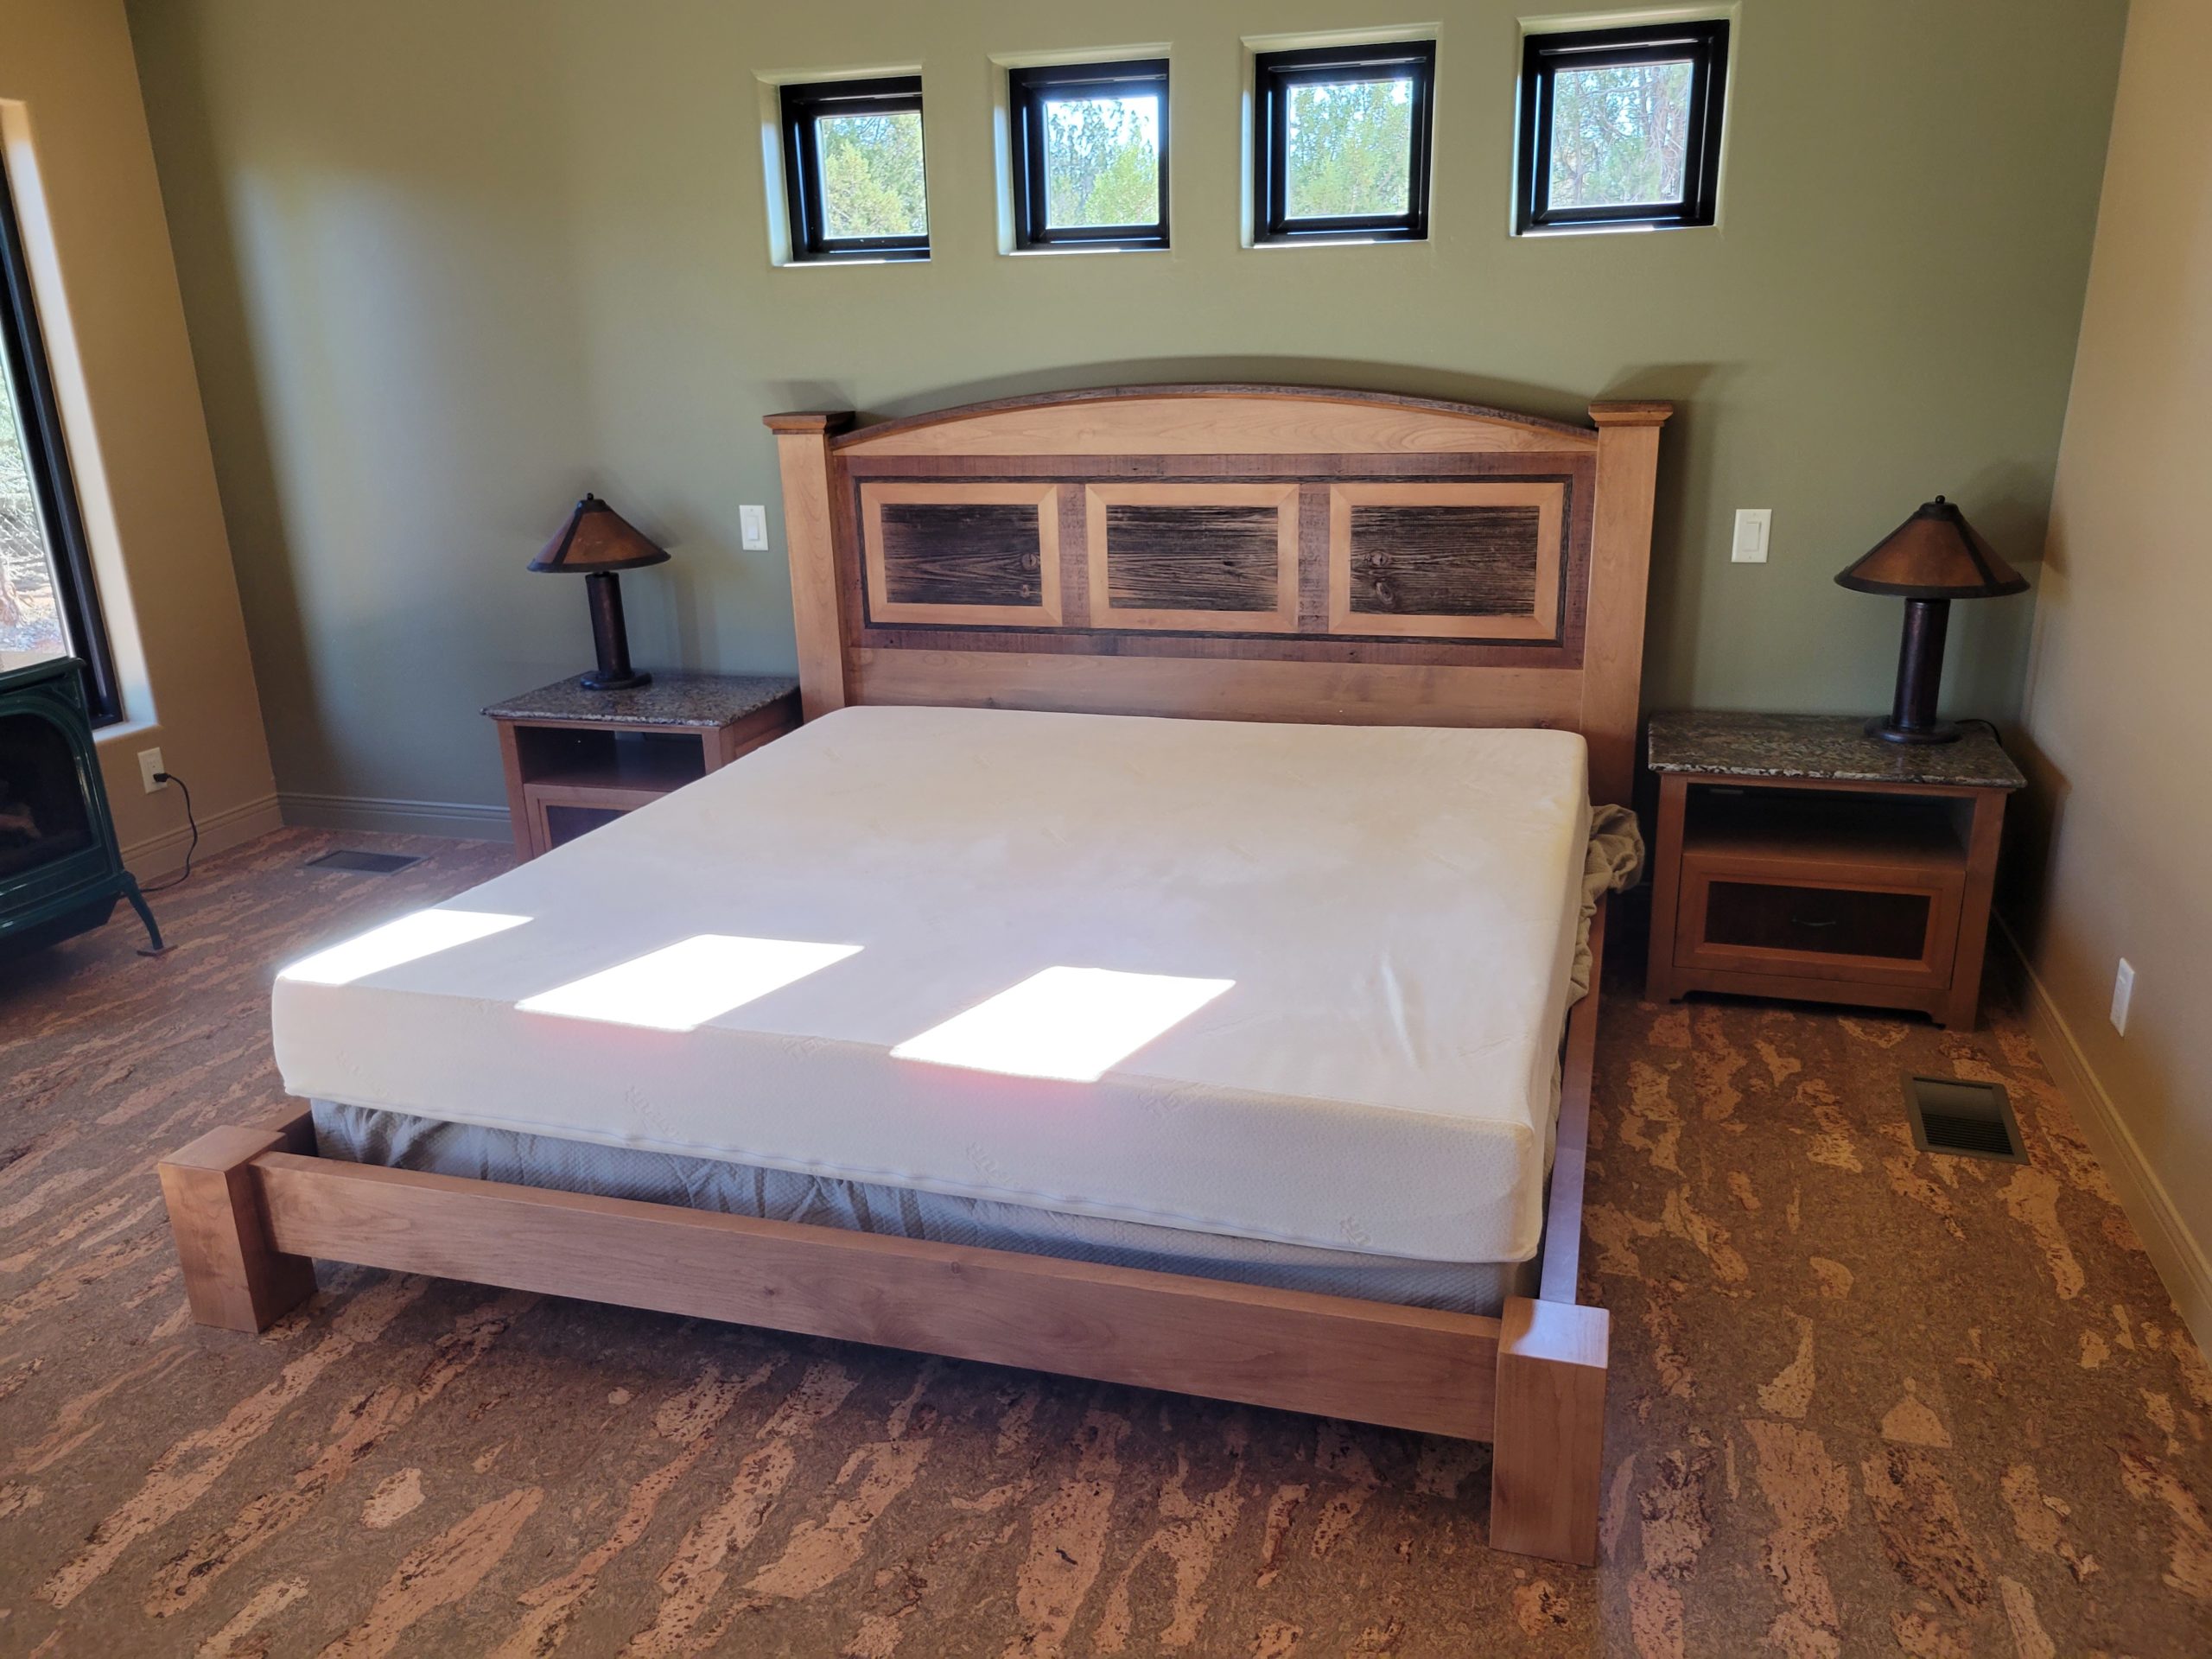 Meoz bedroom set -- the completed bed with headboard and two nightstands